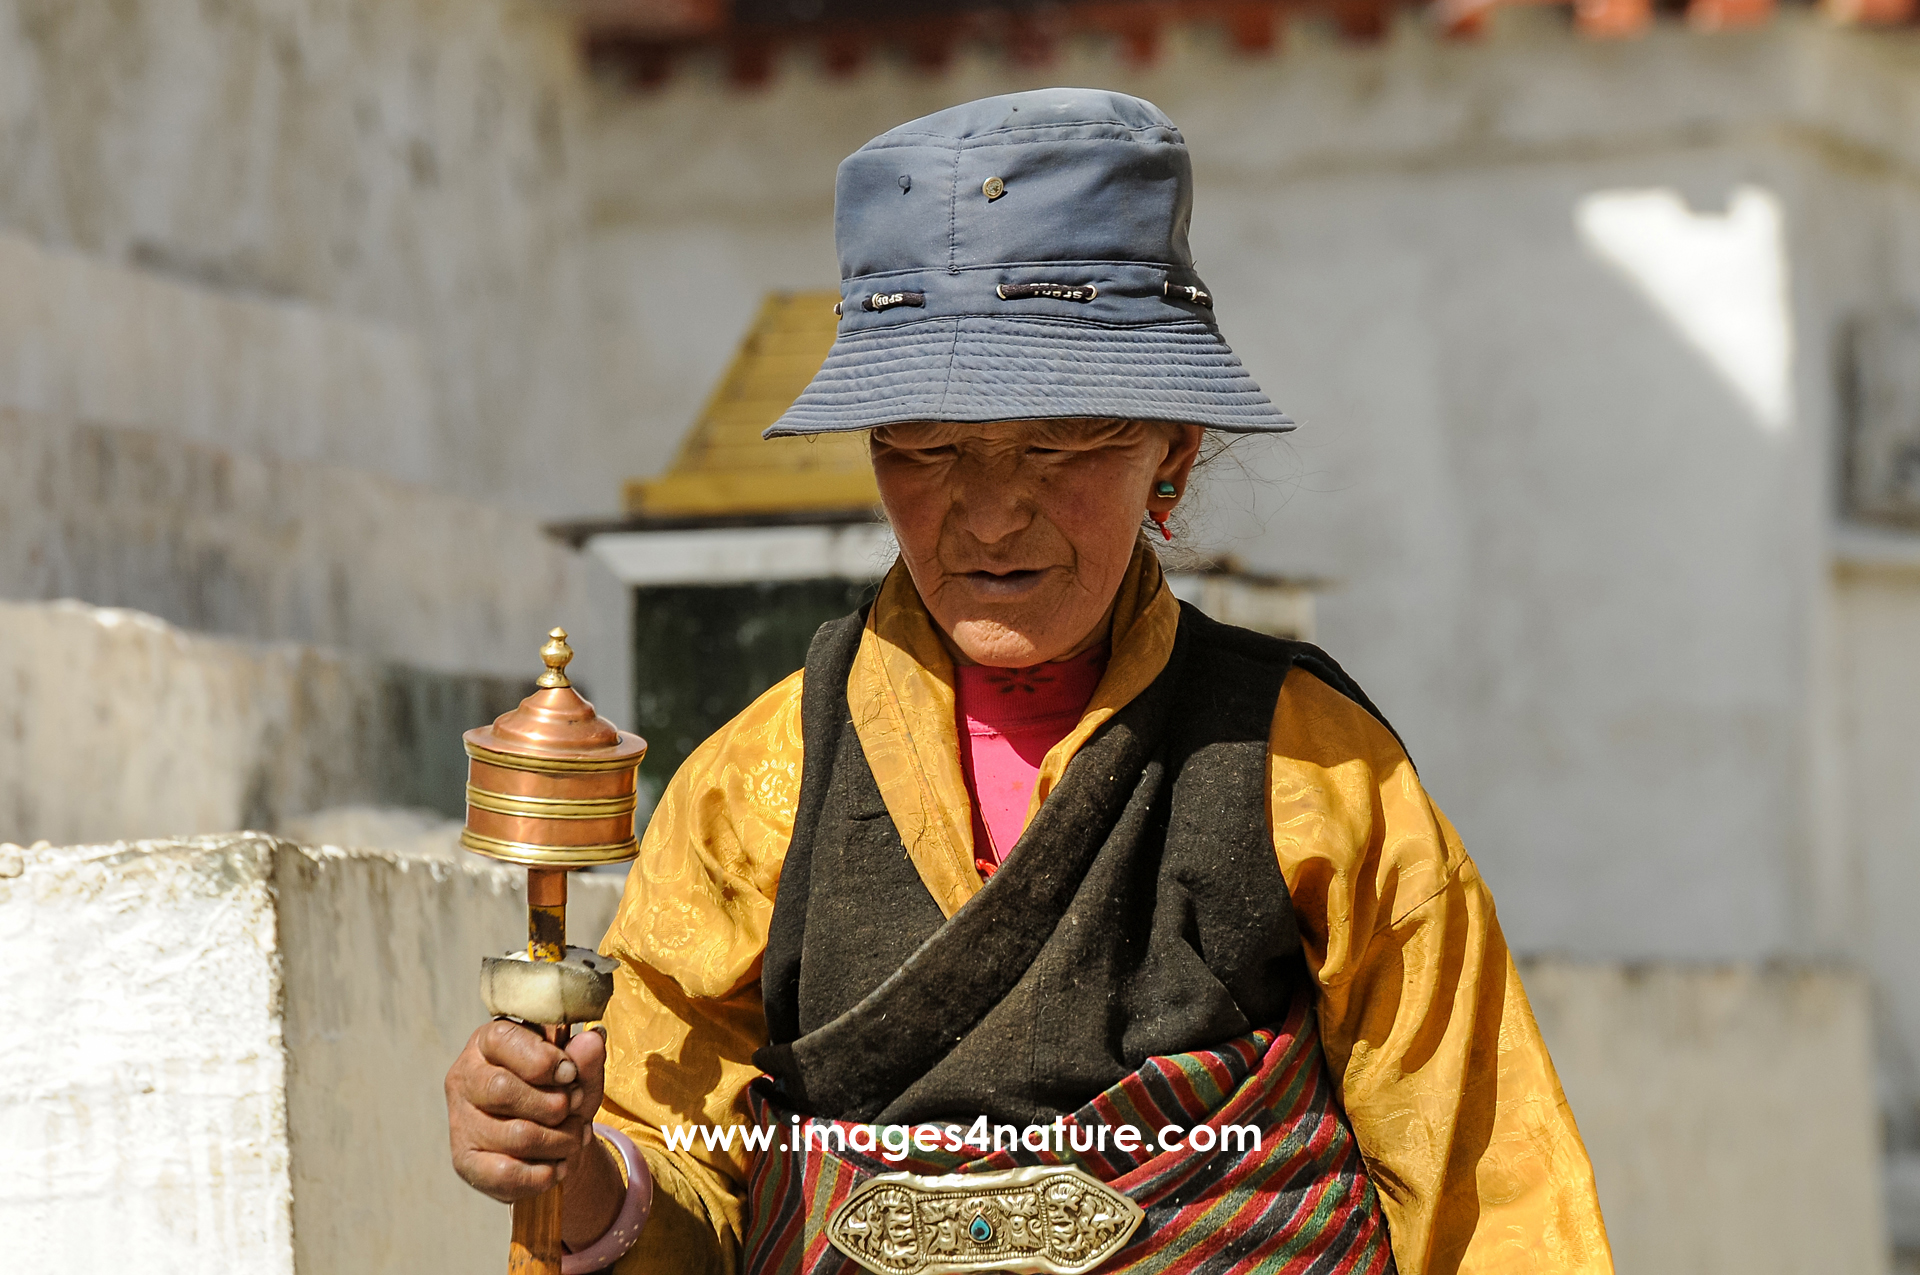 Deeply absorbed Tibetan woman with prayer mill on her pilgrimage inside Tashi Lhumpo monastery